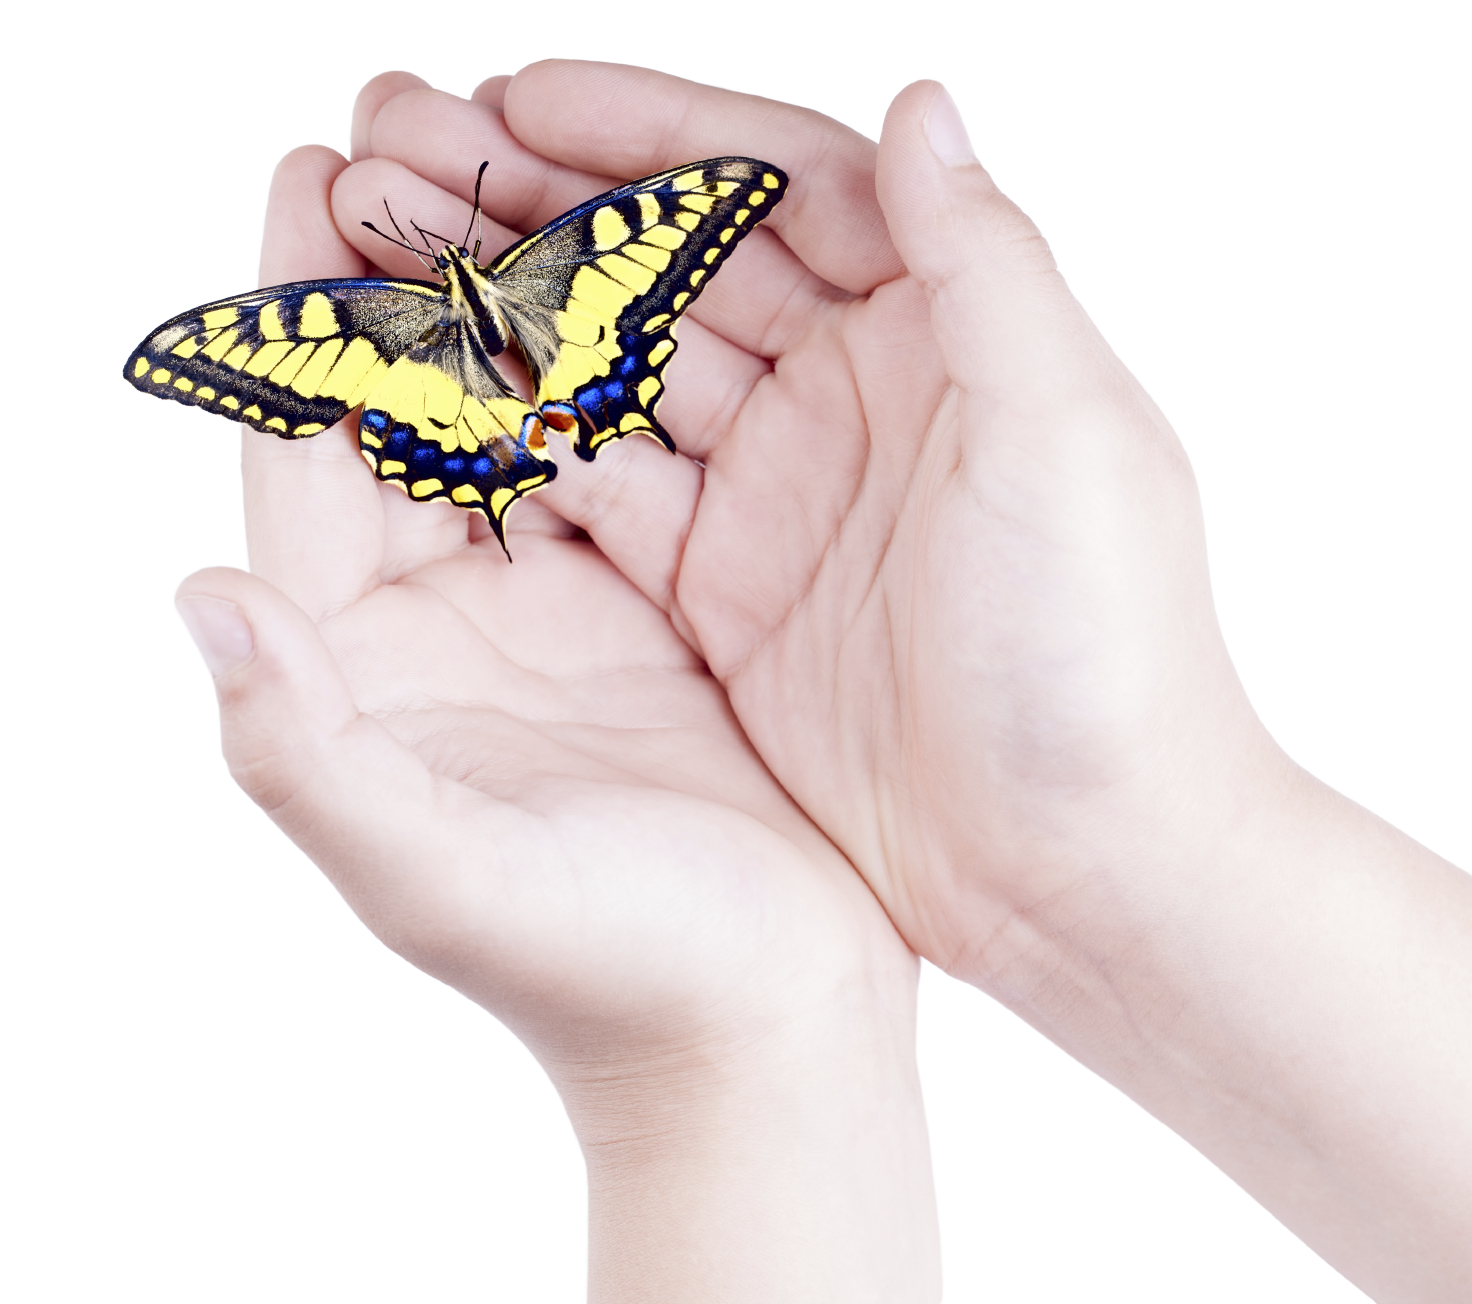 Child with a butterfly in their hands